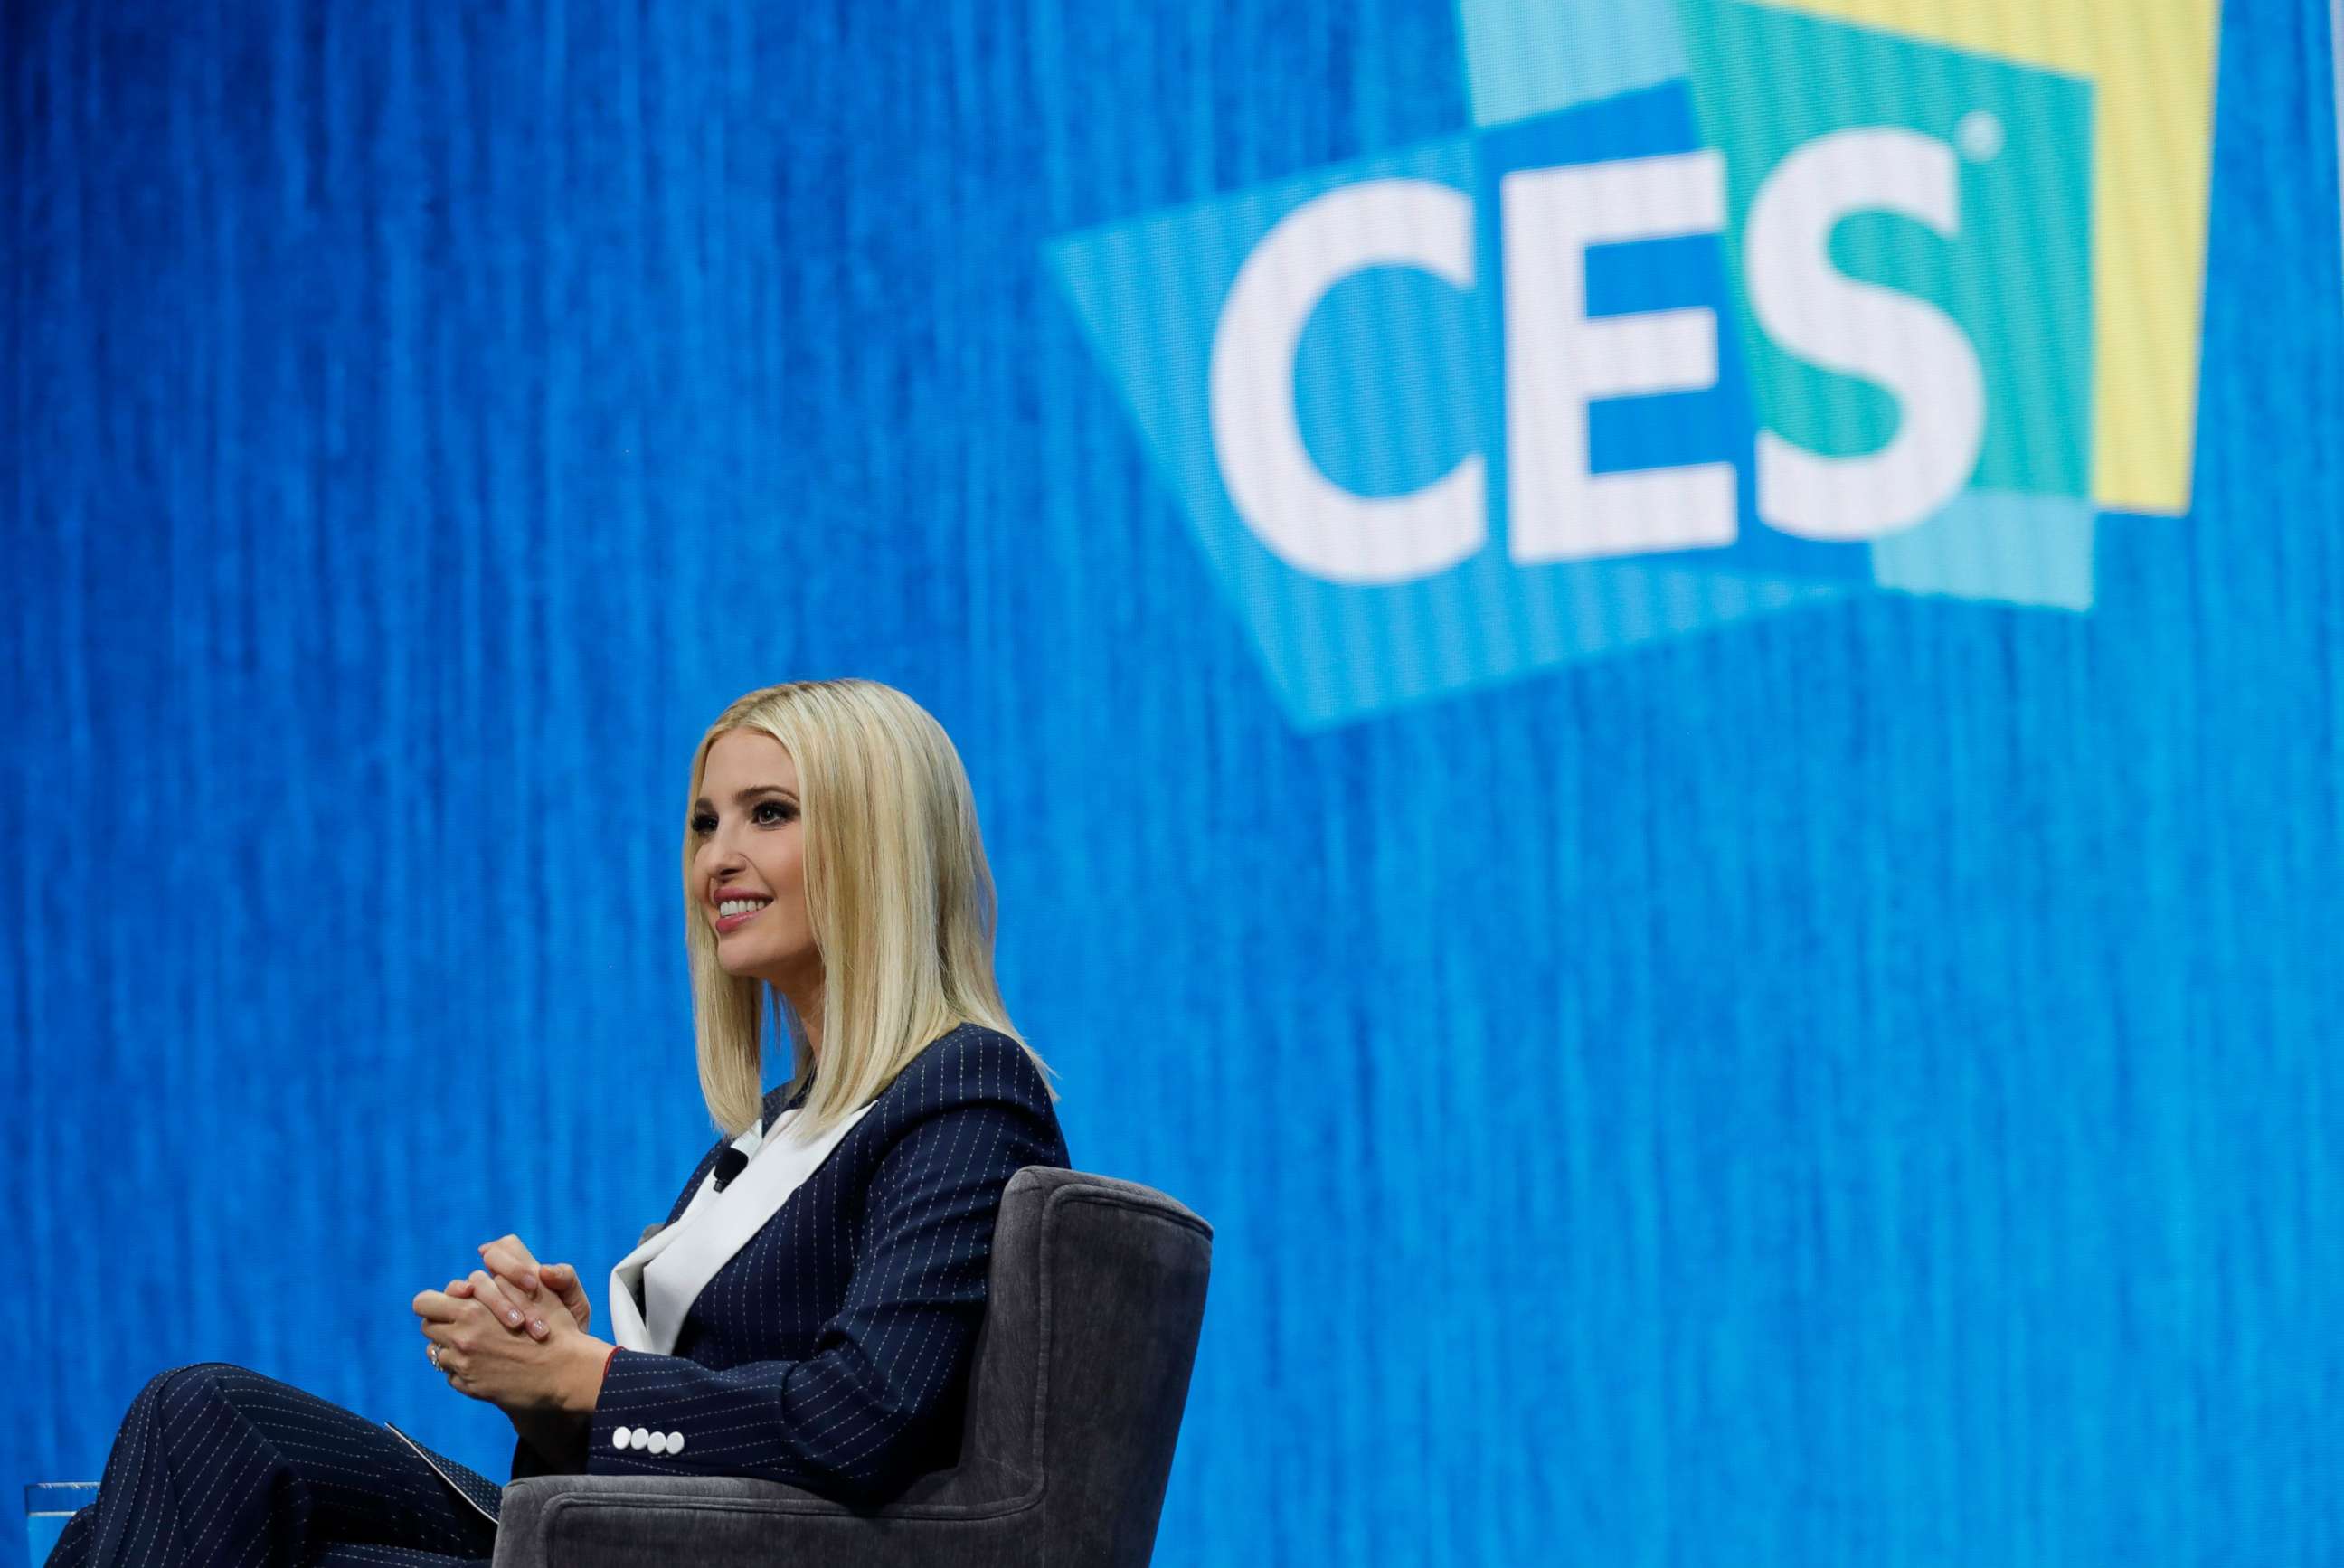 PHOTO: Ivanka Trump, daughter of President Donald Trump, speaks in a keynote address during the 2020 CES in Las Vegas, Nevada, Jan. 7, 2020.